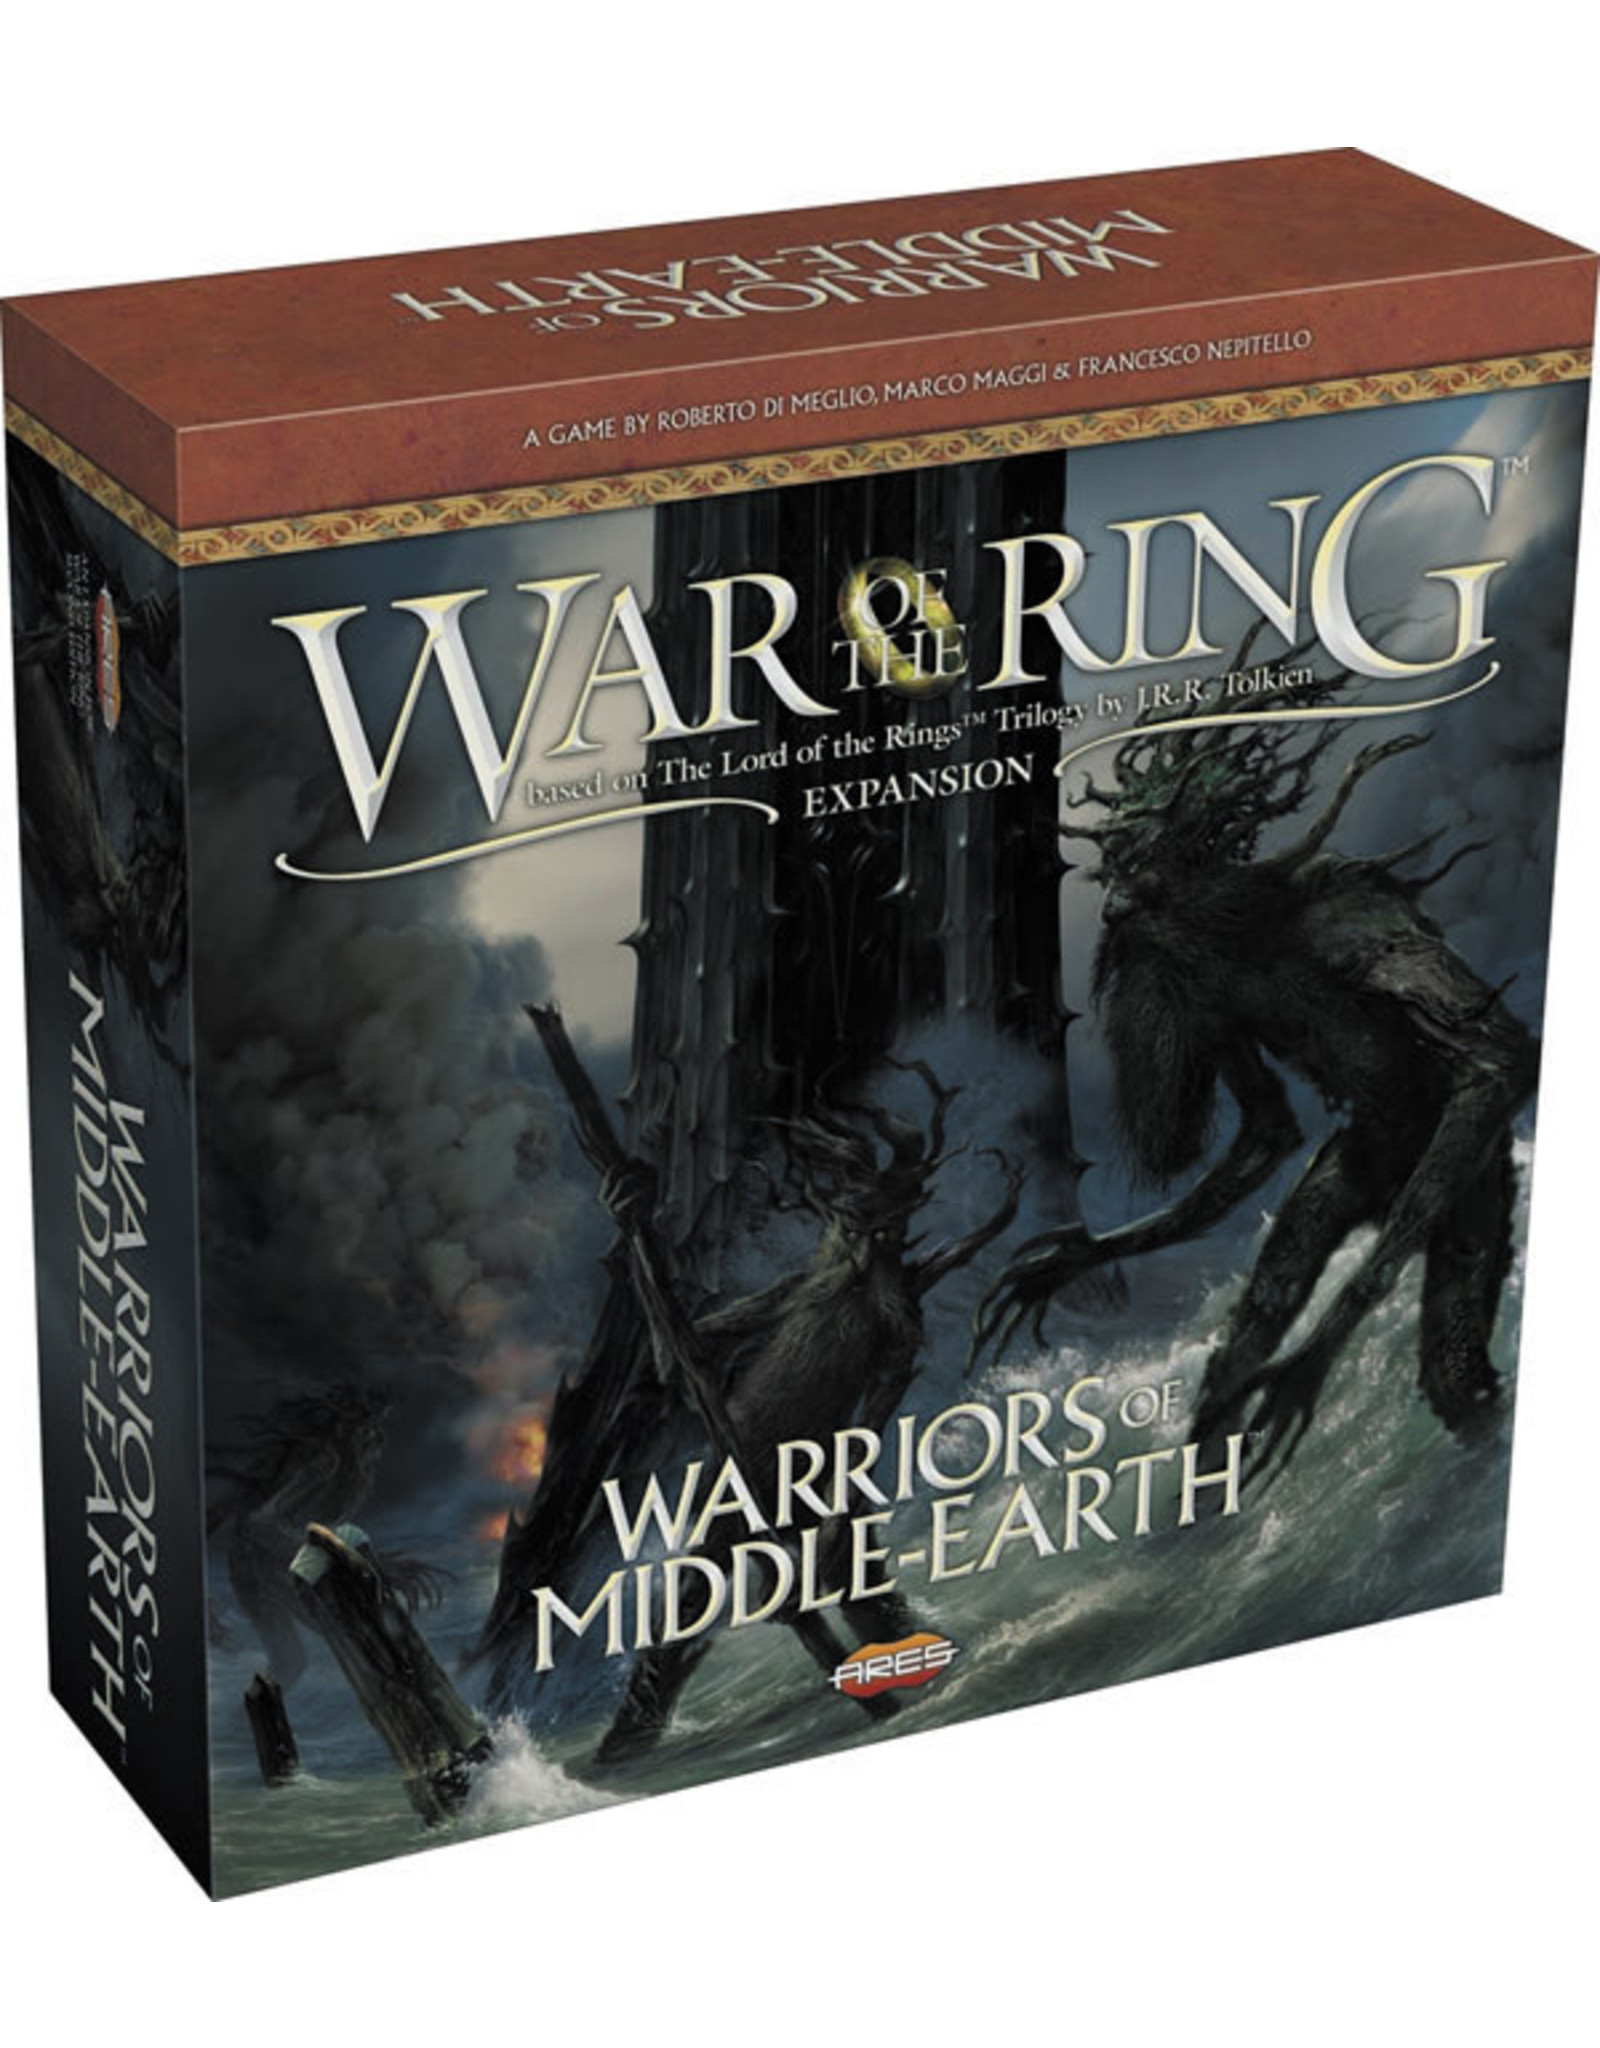 Ares Games War of the Ring: Warriors of Middle-Earth